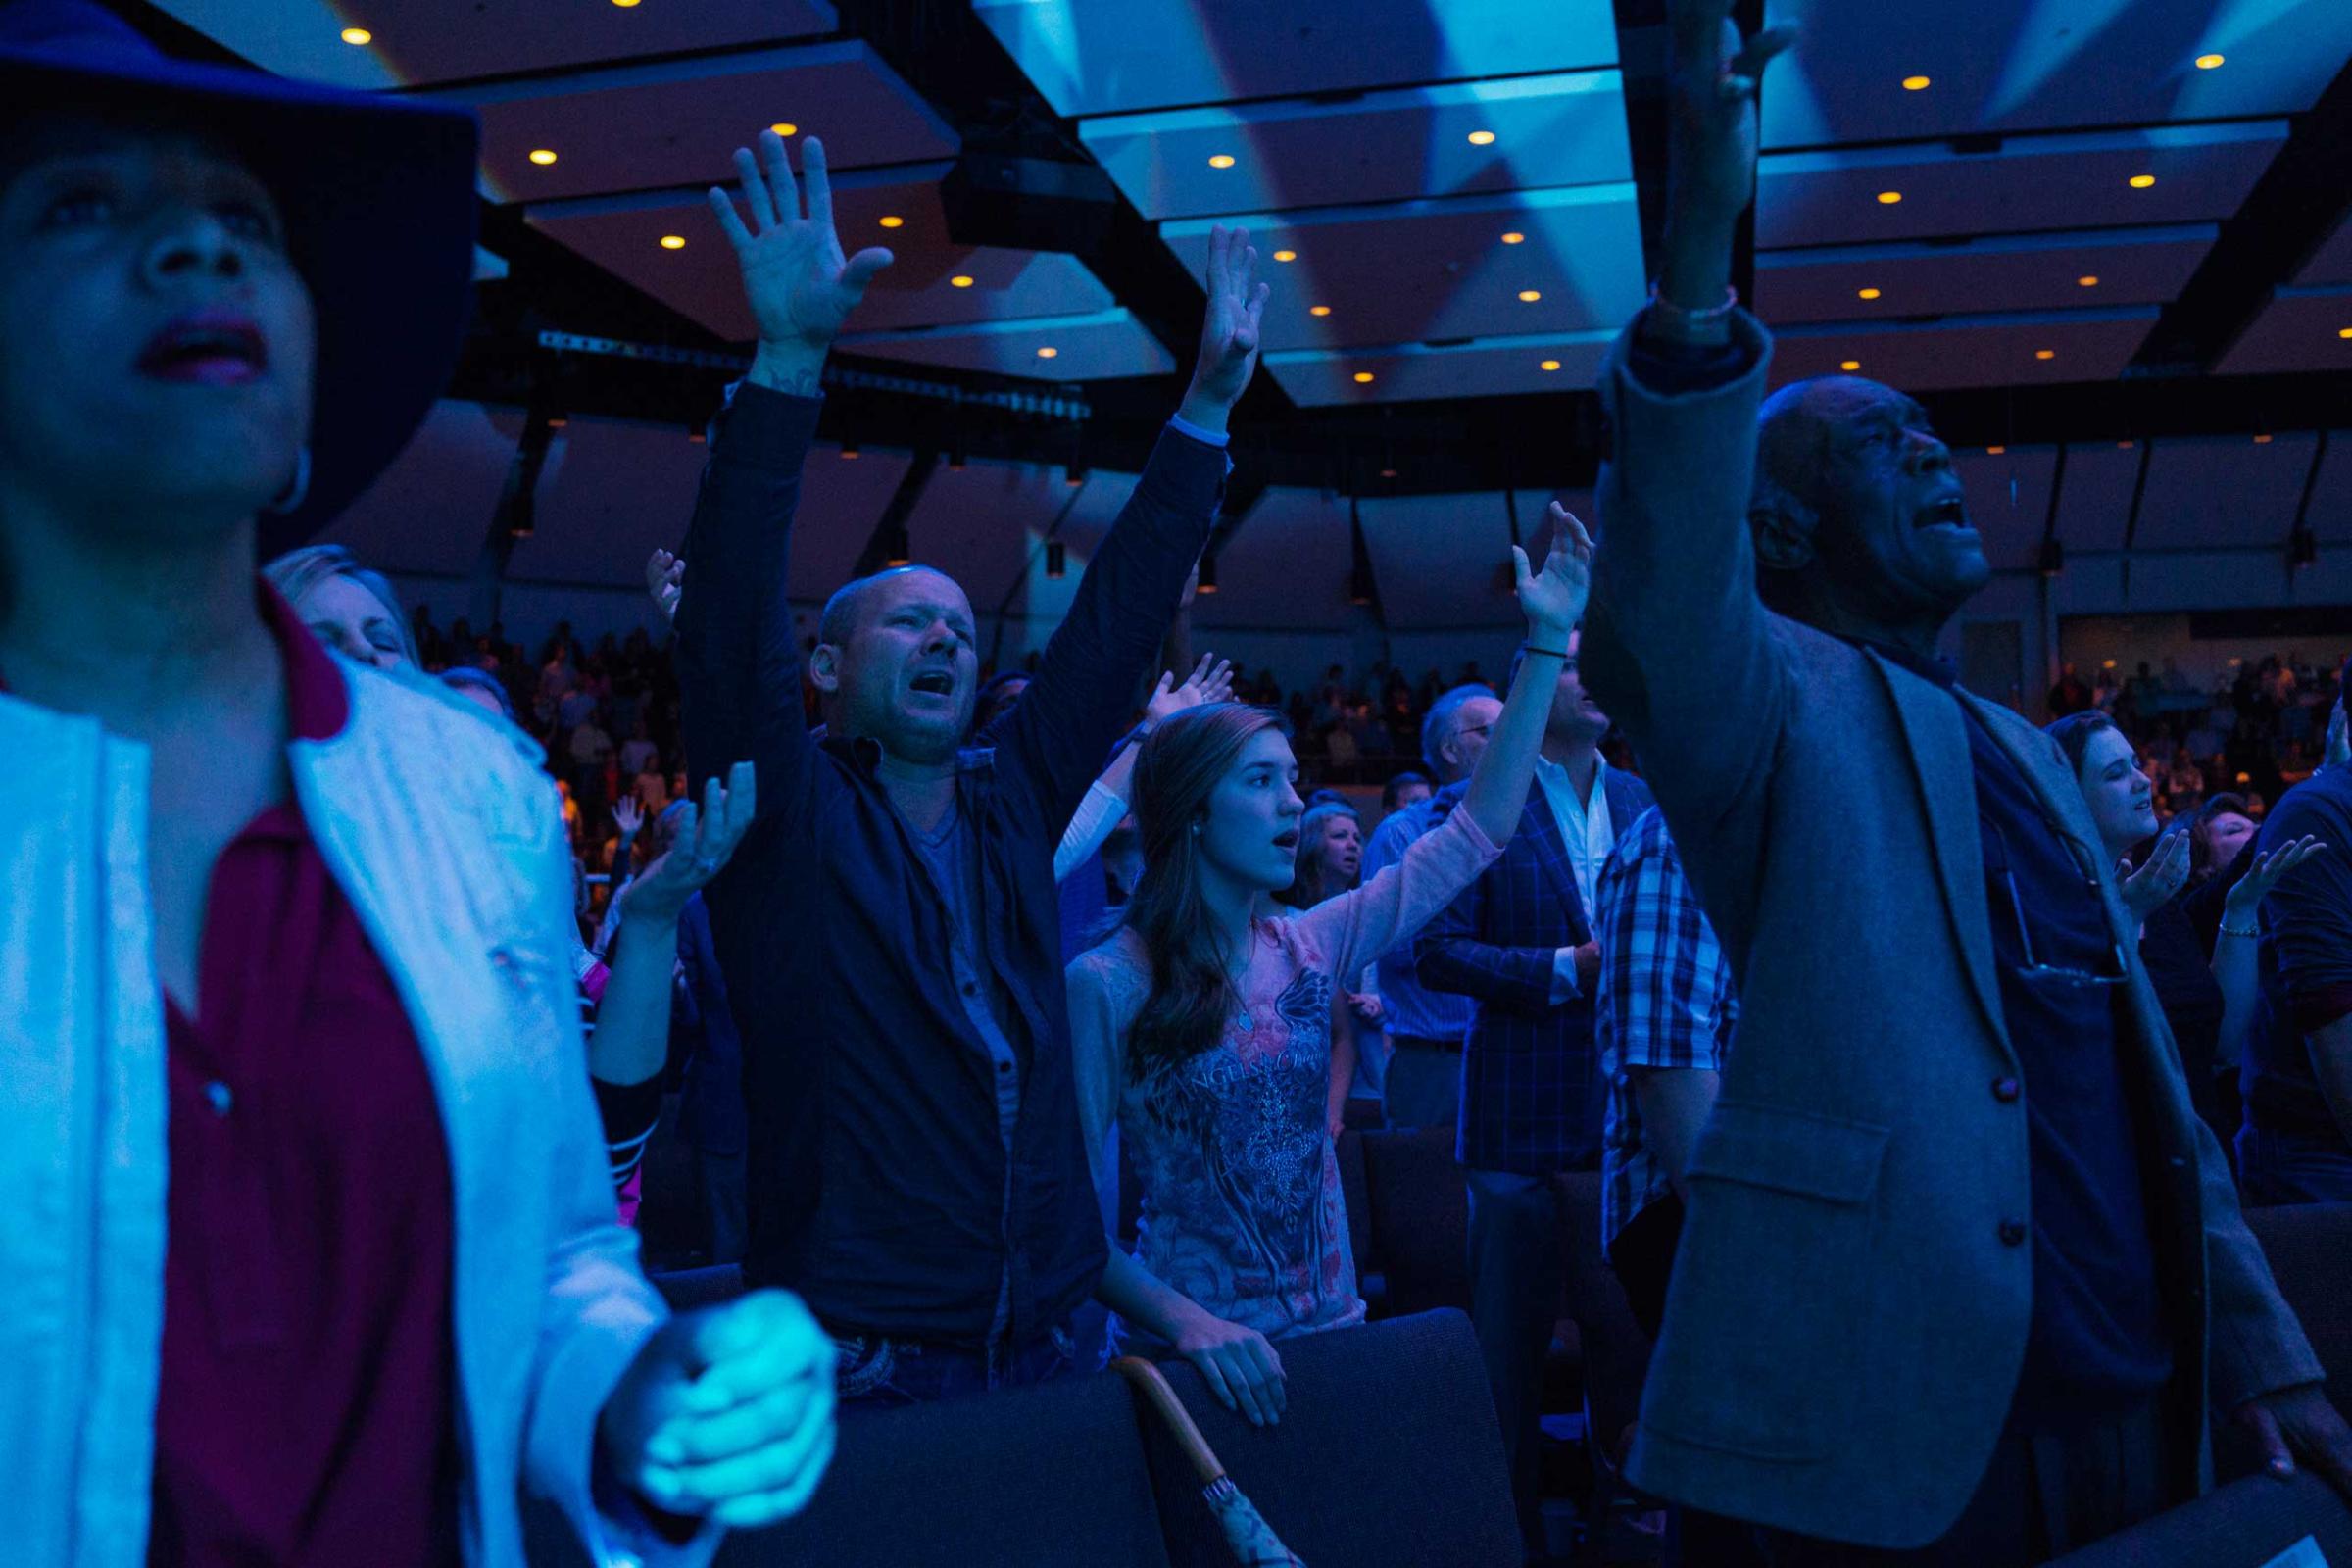 People pray and sing during worship time at Church of the Highlands in Birmingham, Ala. on March 22, 2015.